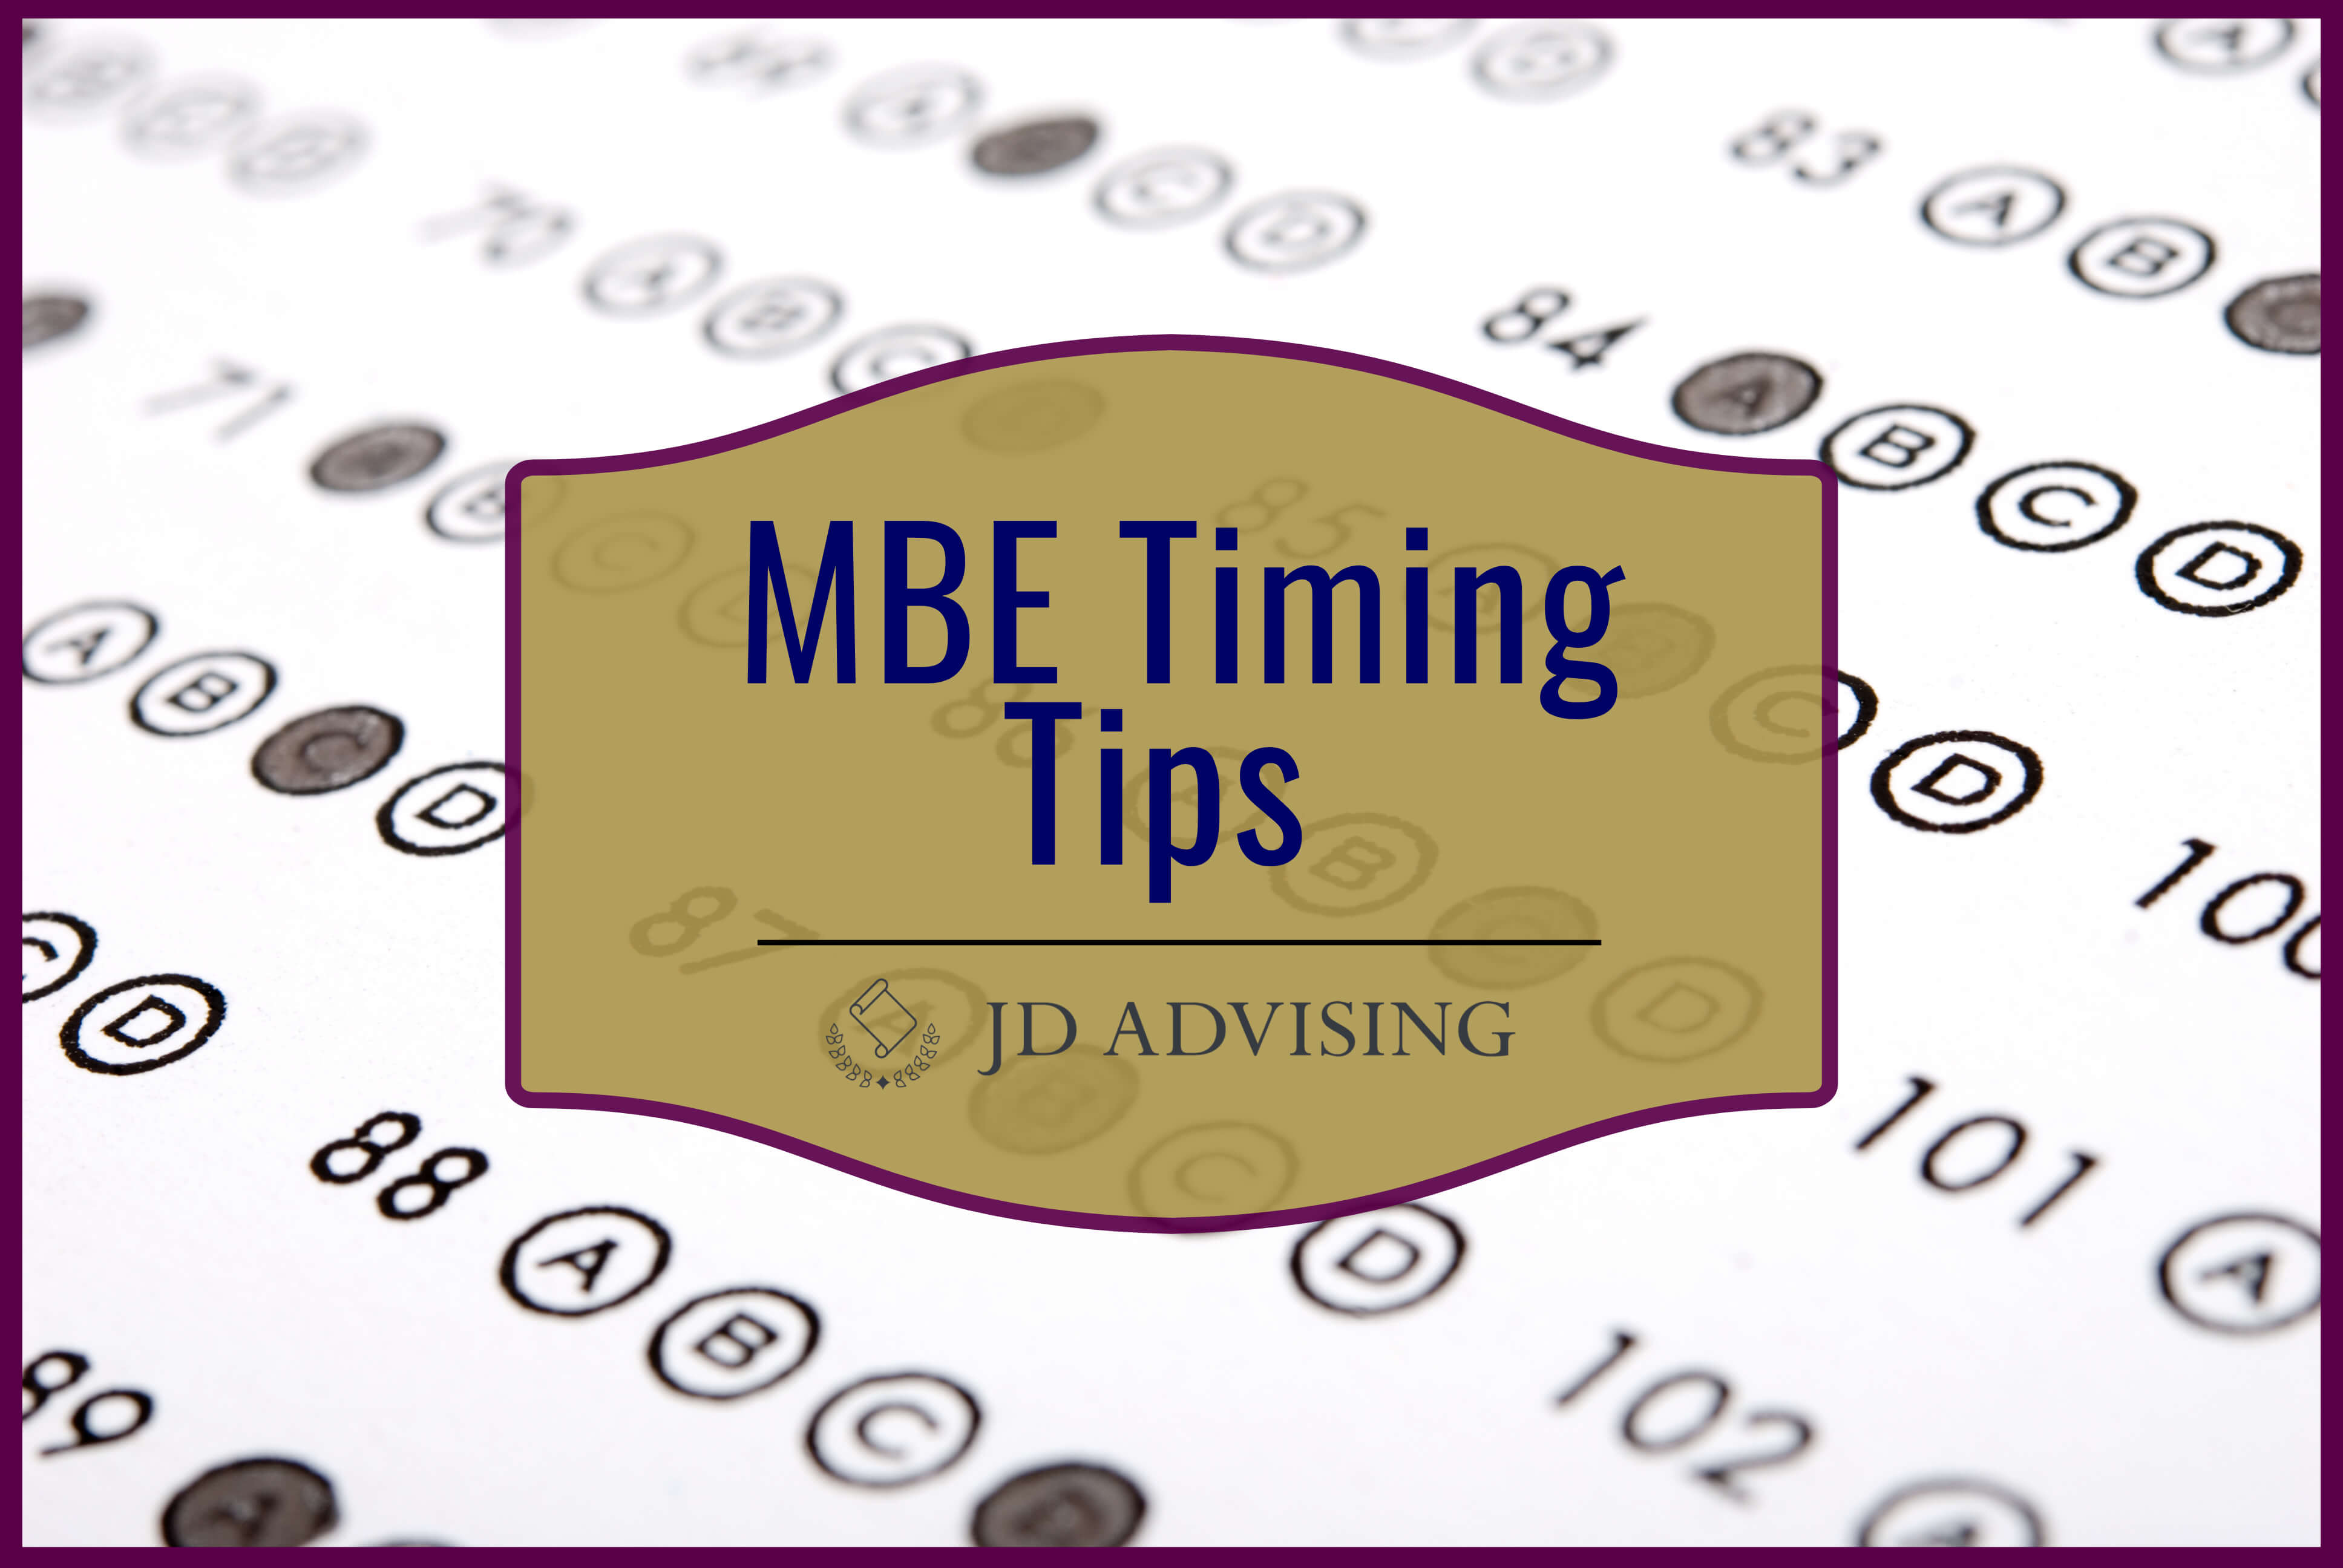 MBE timing tips, improve timing on the MBE